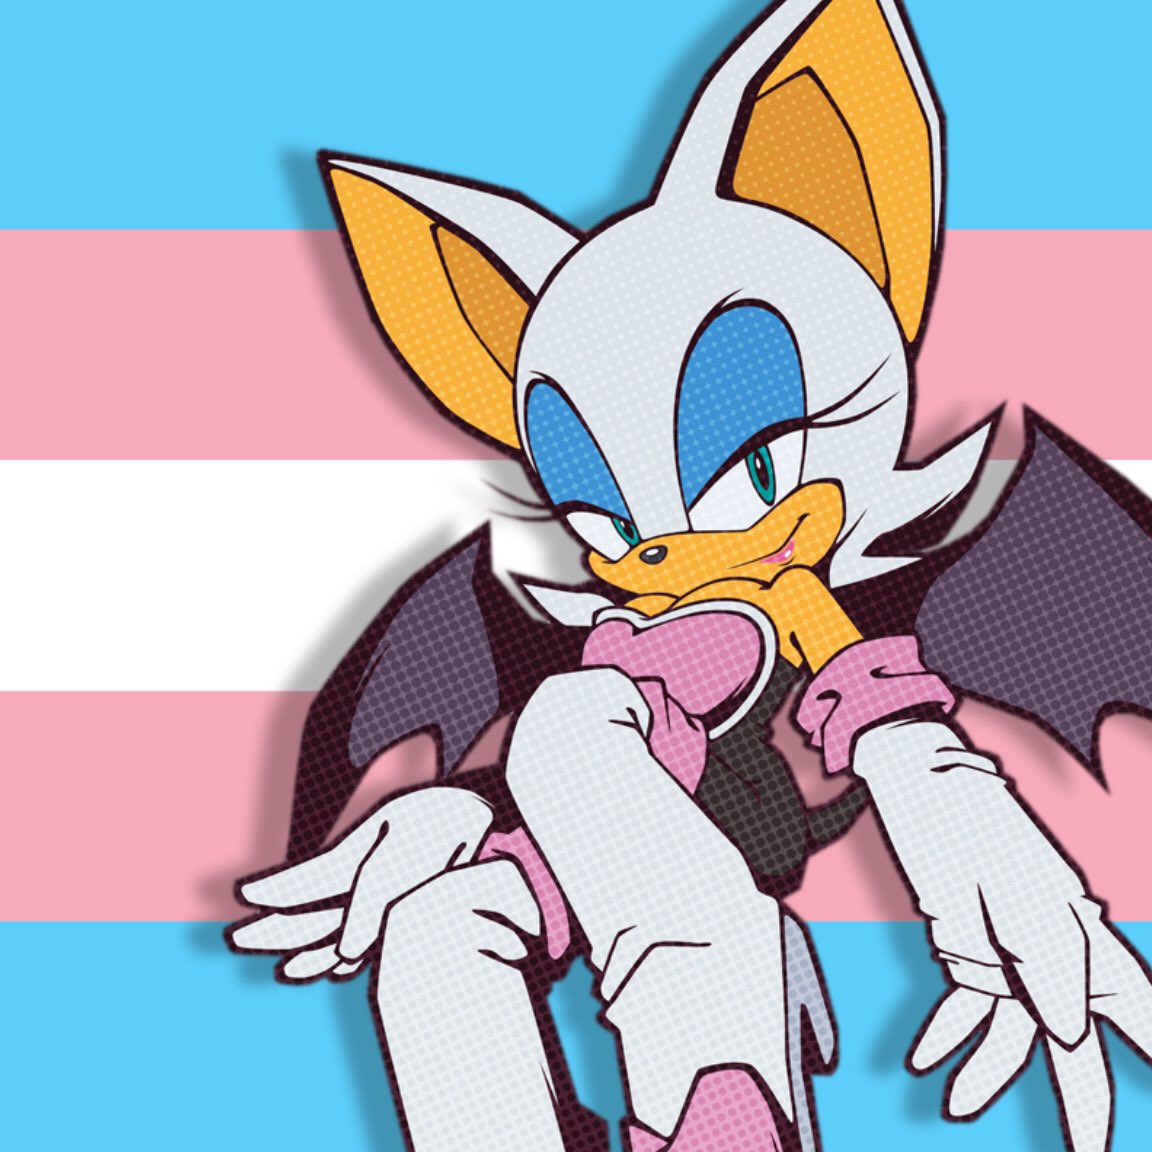 Happy Transgender Visibility Day to my trans friends out there! Here’s a trans Rouge icon I made a while ago. Have an amazing day